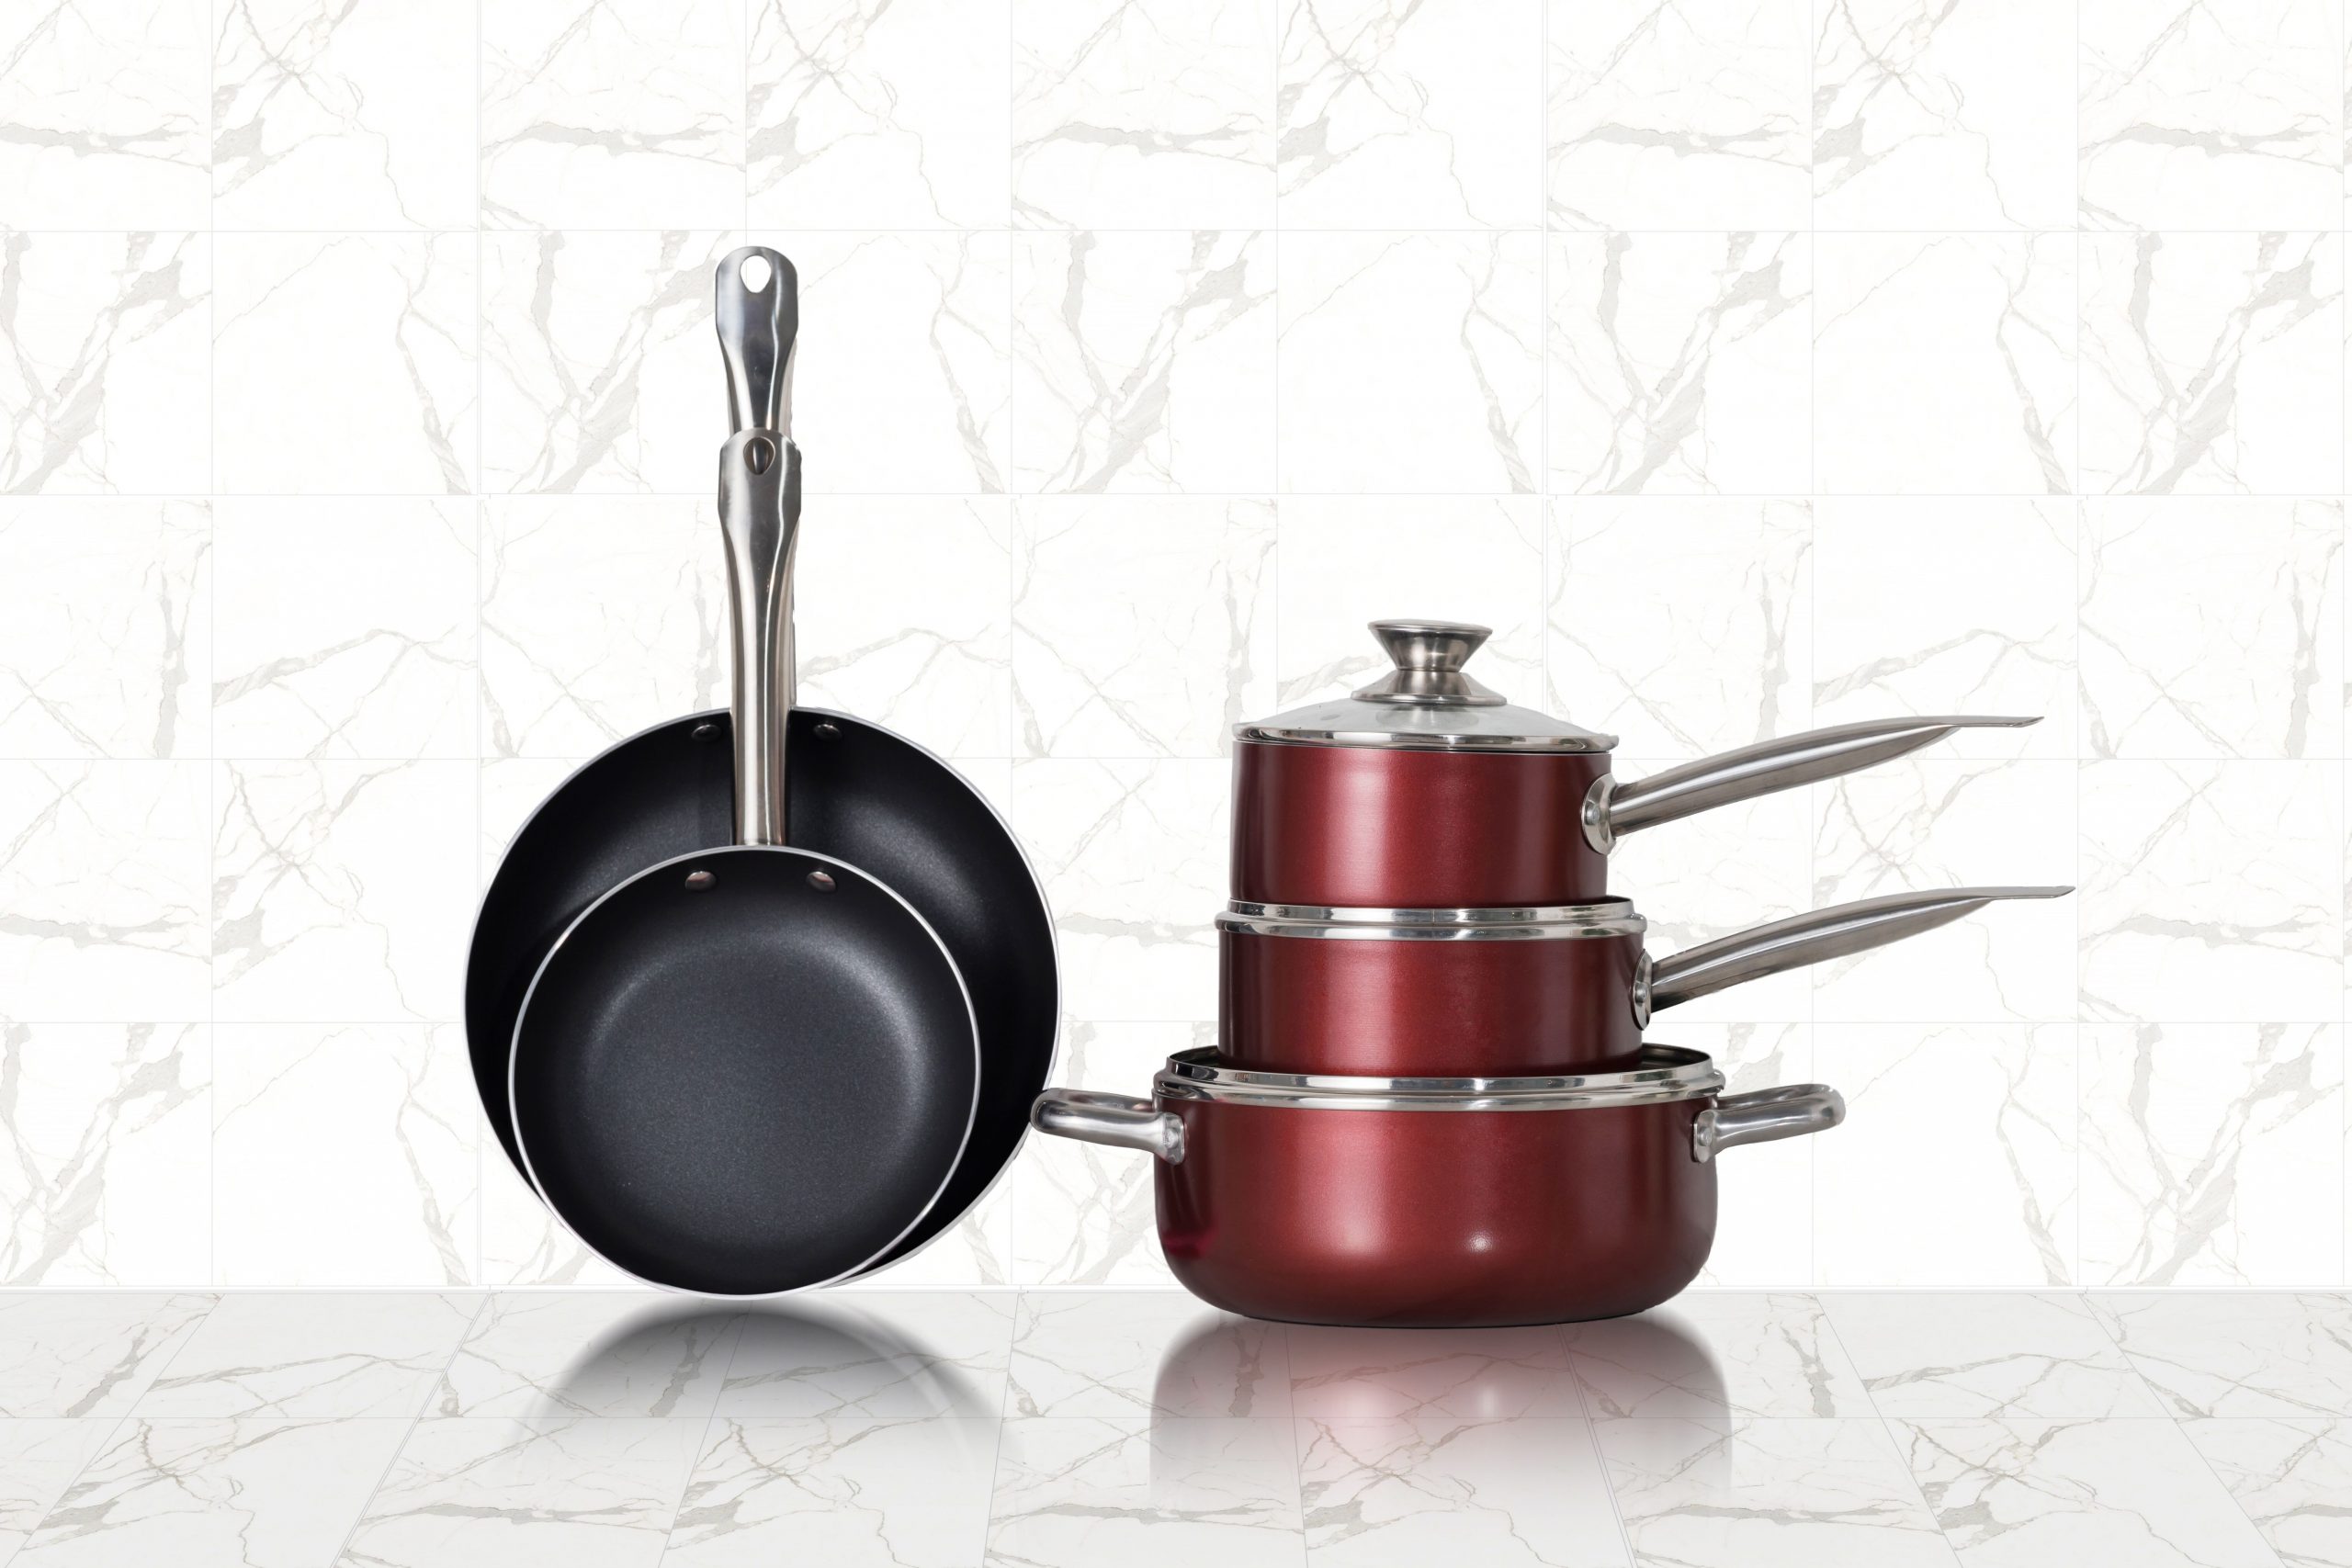 Get To Know Your Cookware